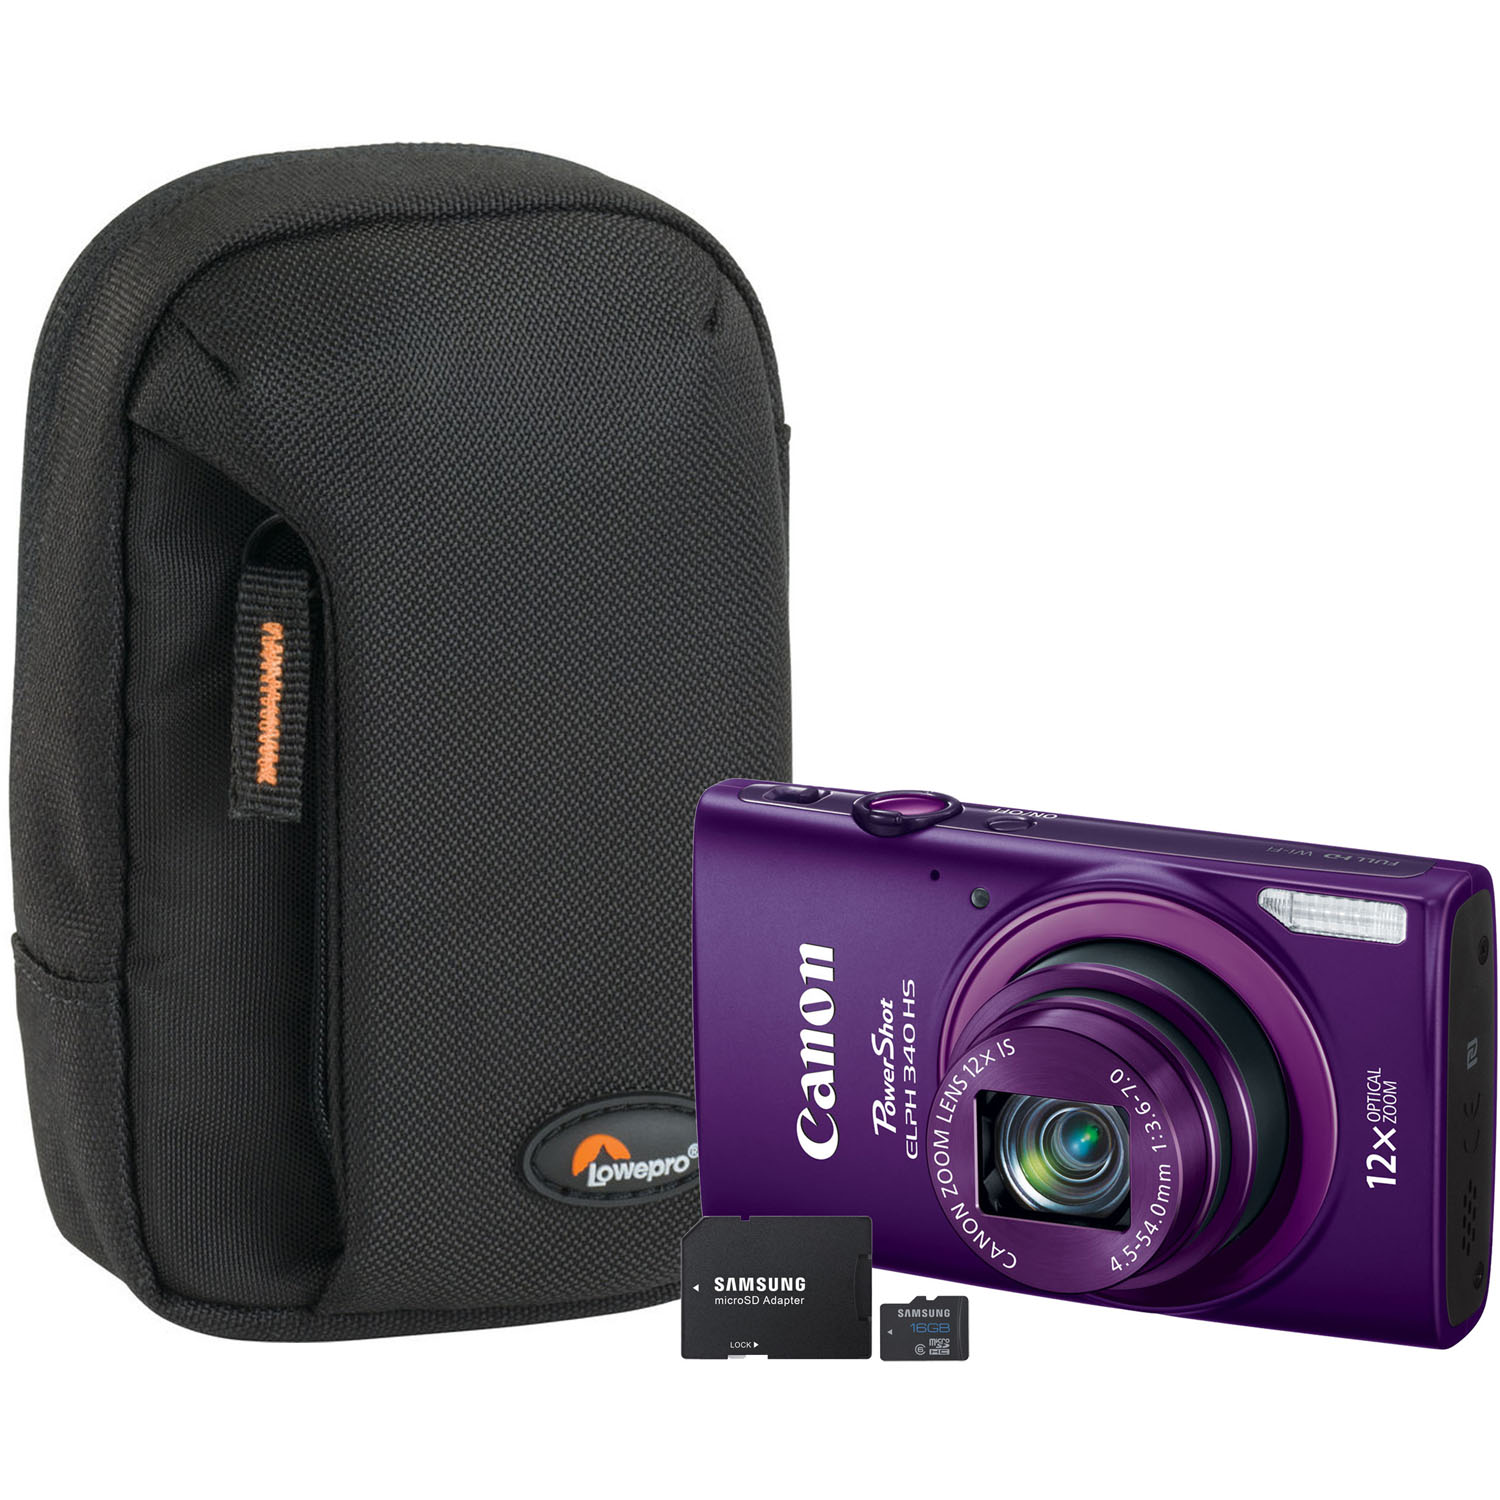 PowerShot ELPH 340 HS 16MP Purple Digital Camera, 16GB microSD Card with Adapter and Compact Camera Pouch